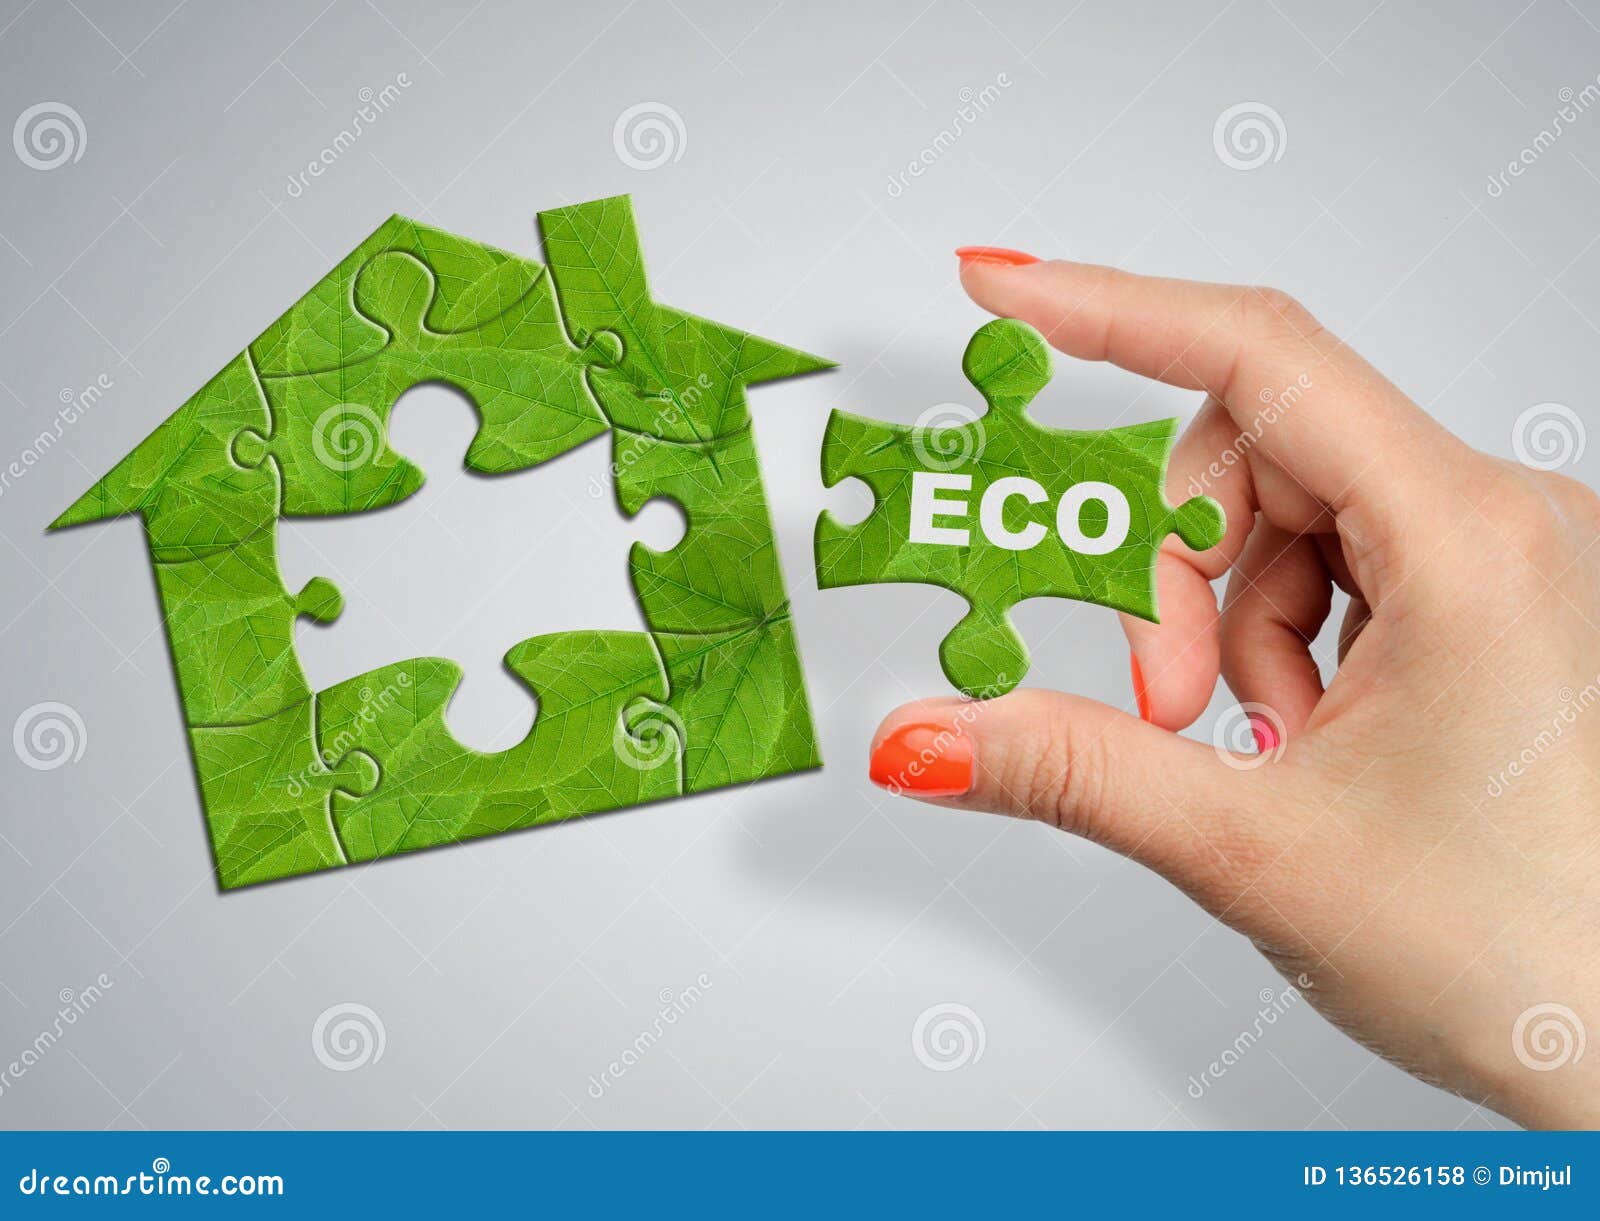 eco friendly house concept, home made from green puzzle